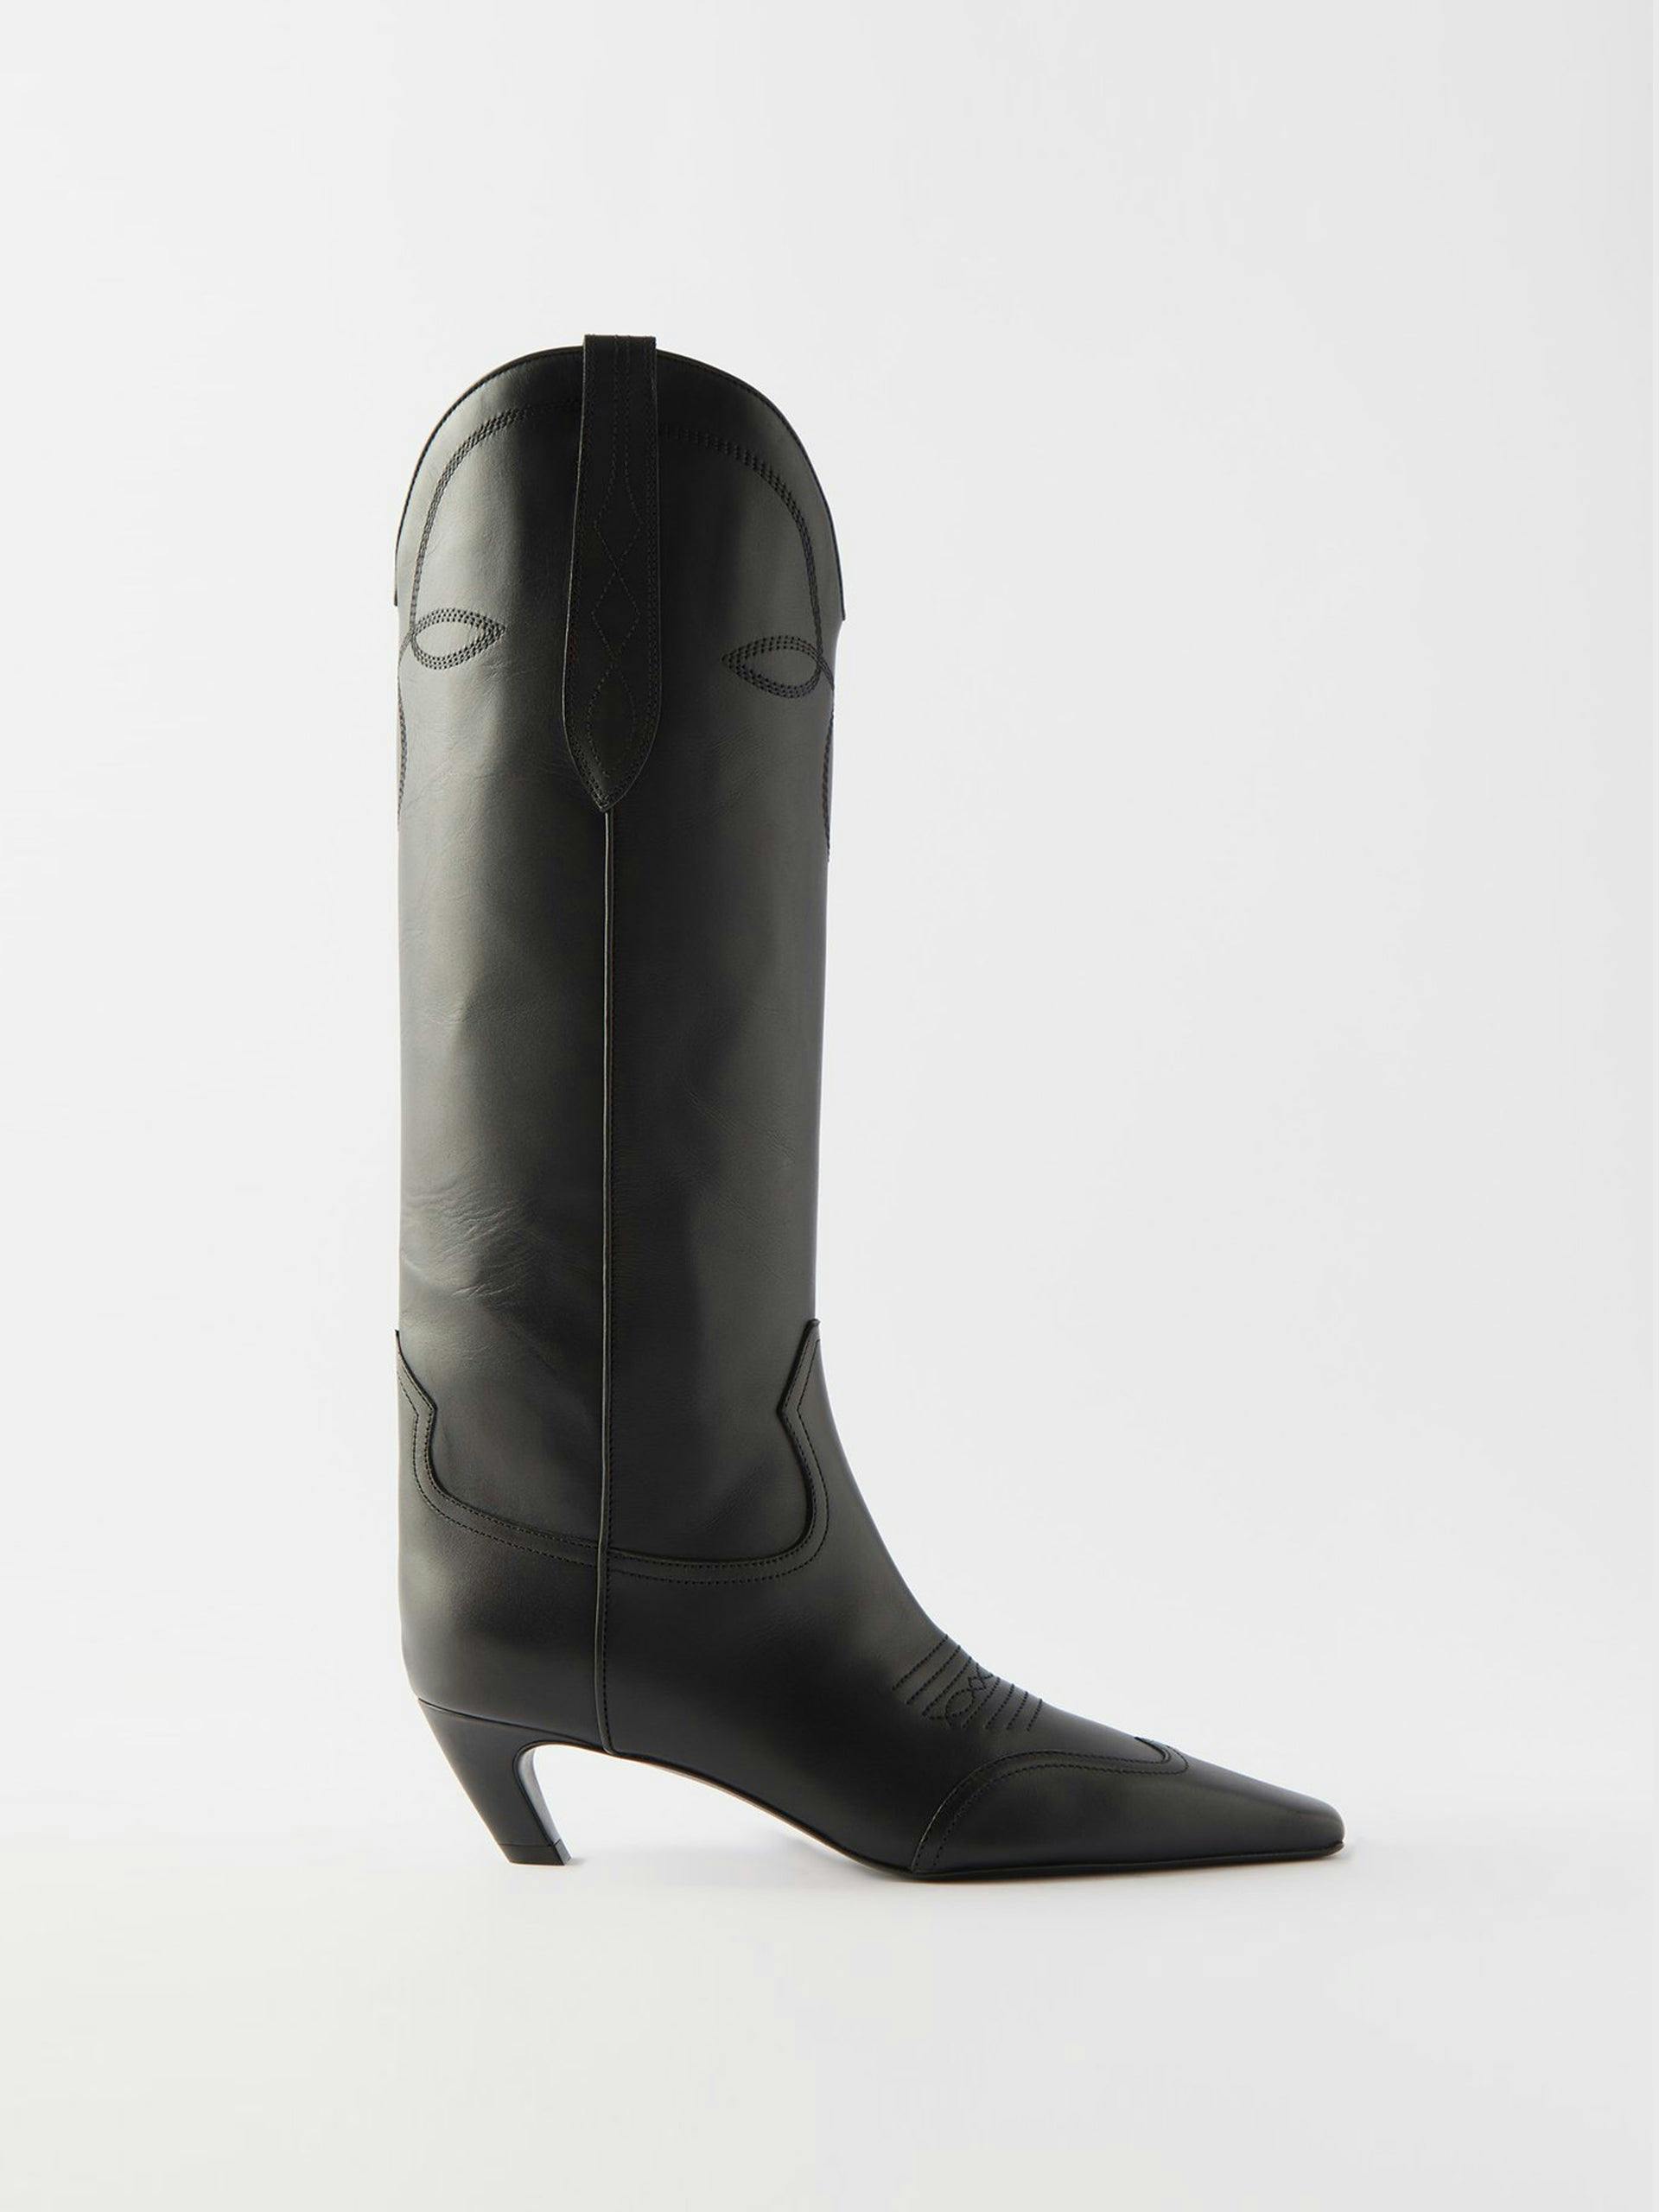 Dallas 45 leather knee-high boots